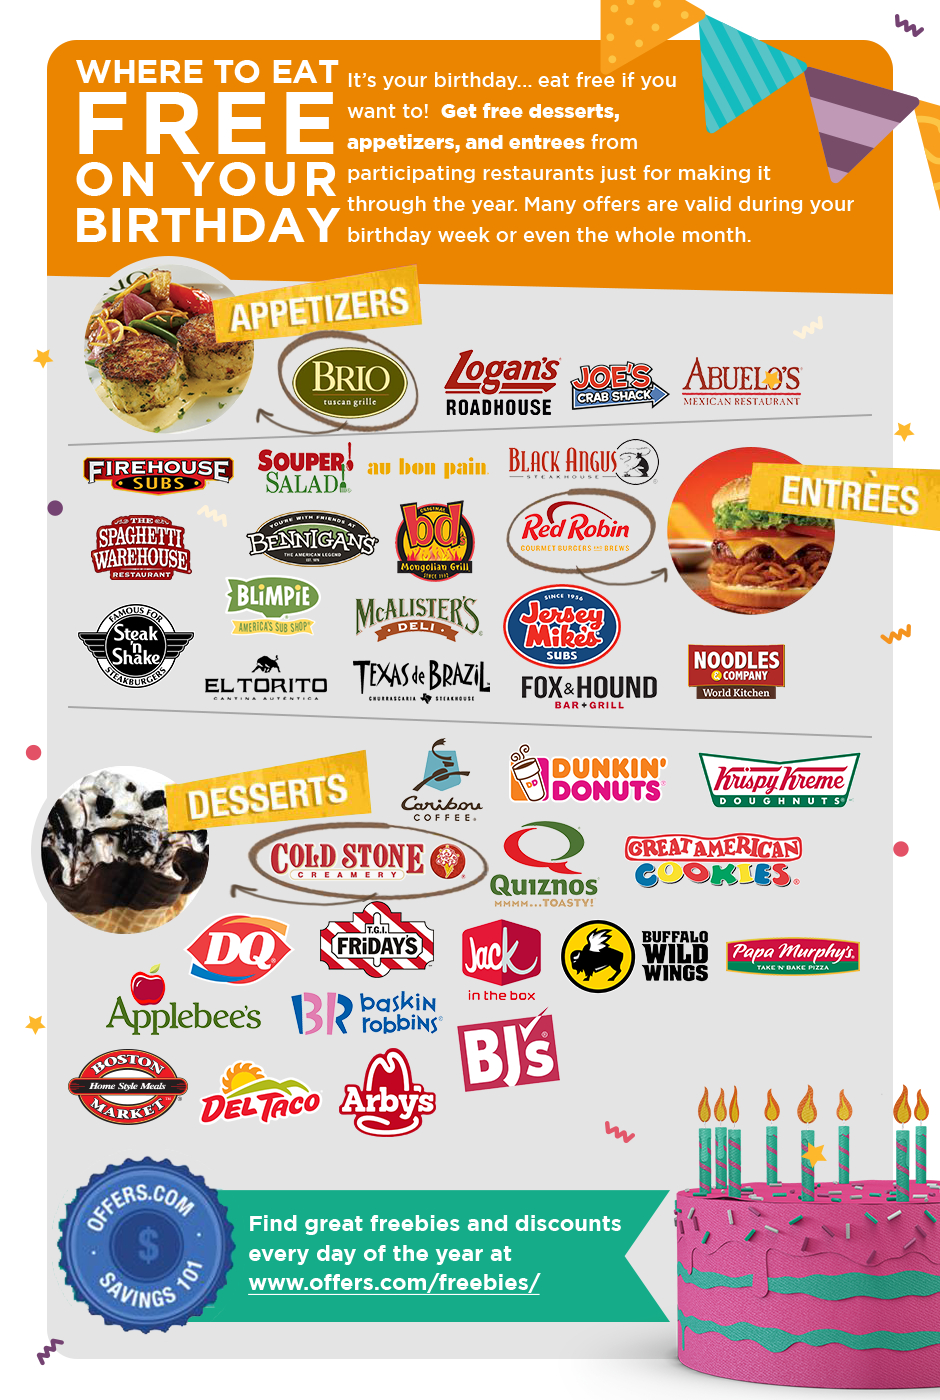 Free Birthday Meals 2019 - Restaurant W/ Free Food On Your Birthday - Texas Roadhouse Free Appetizer Printable Coupon 2015